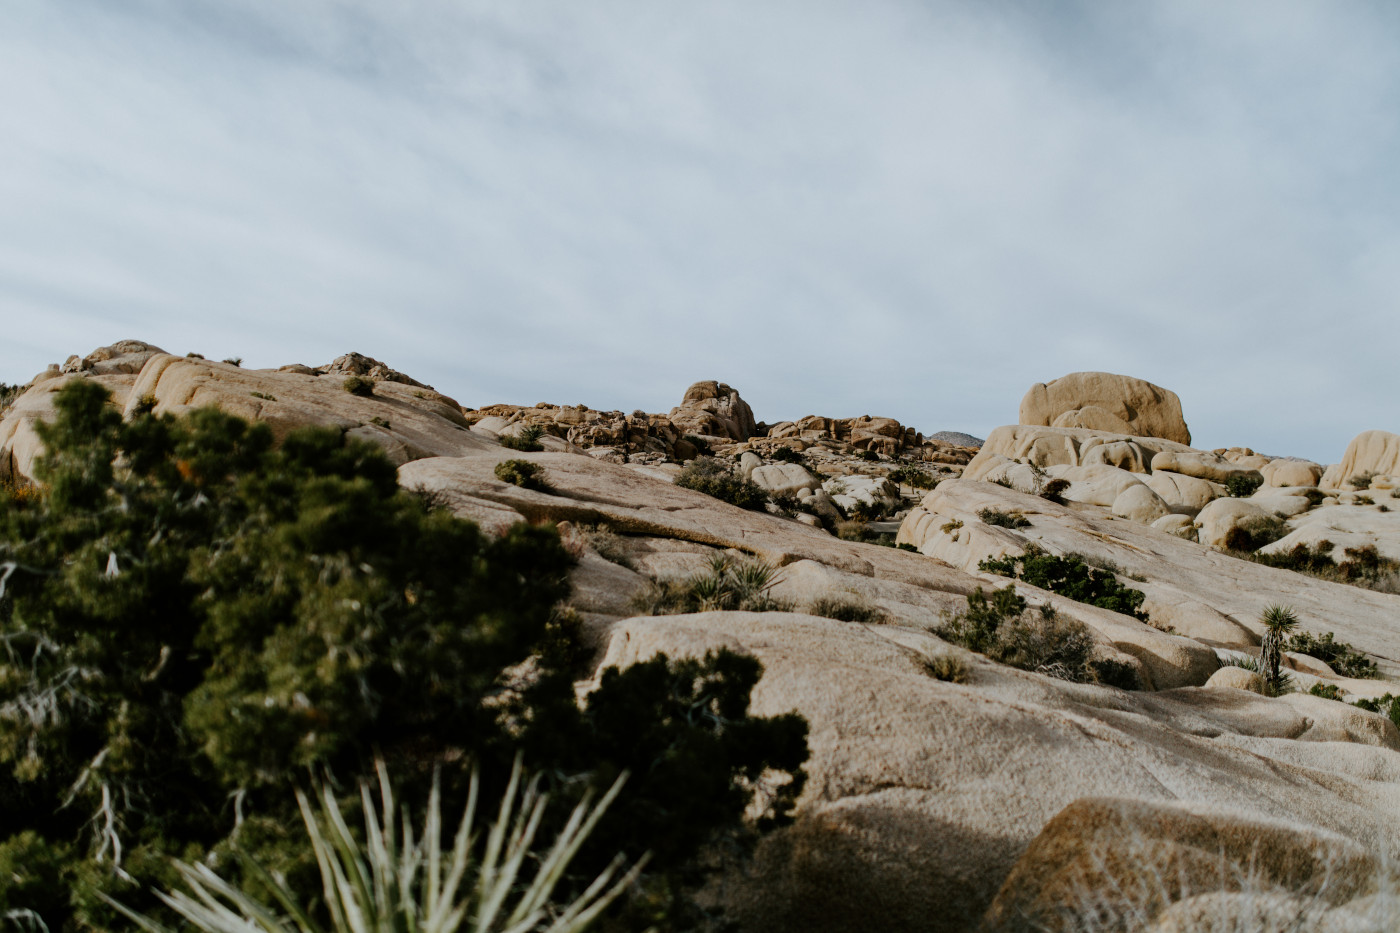 A look at the landscape of Joshua Tree National Park.